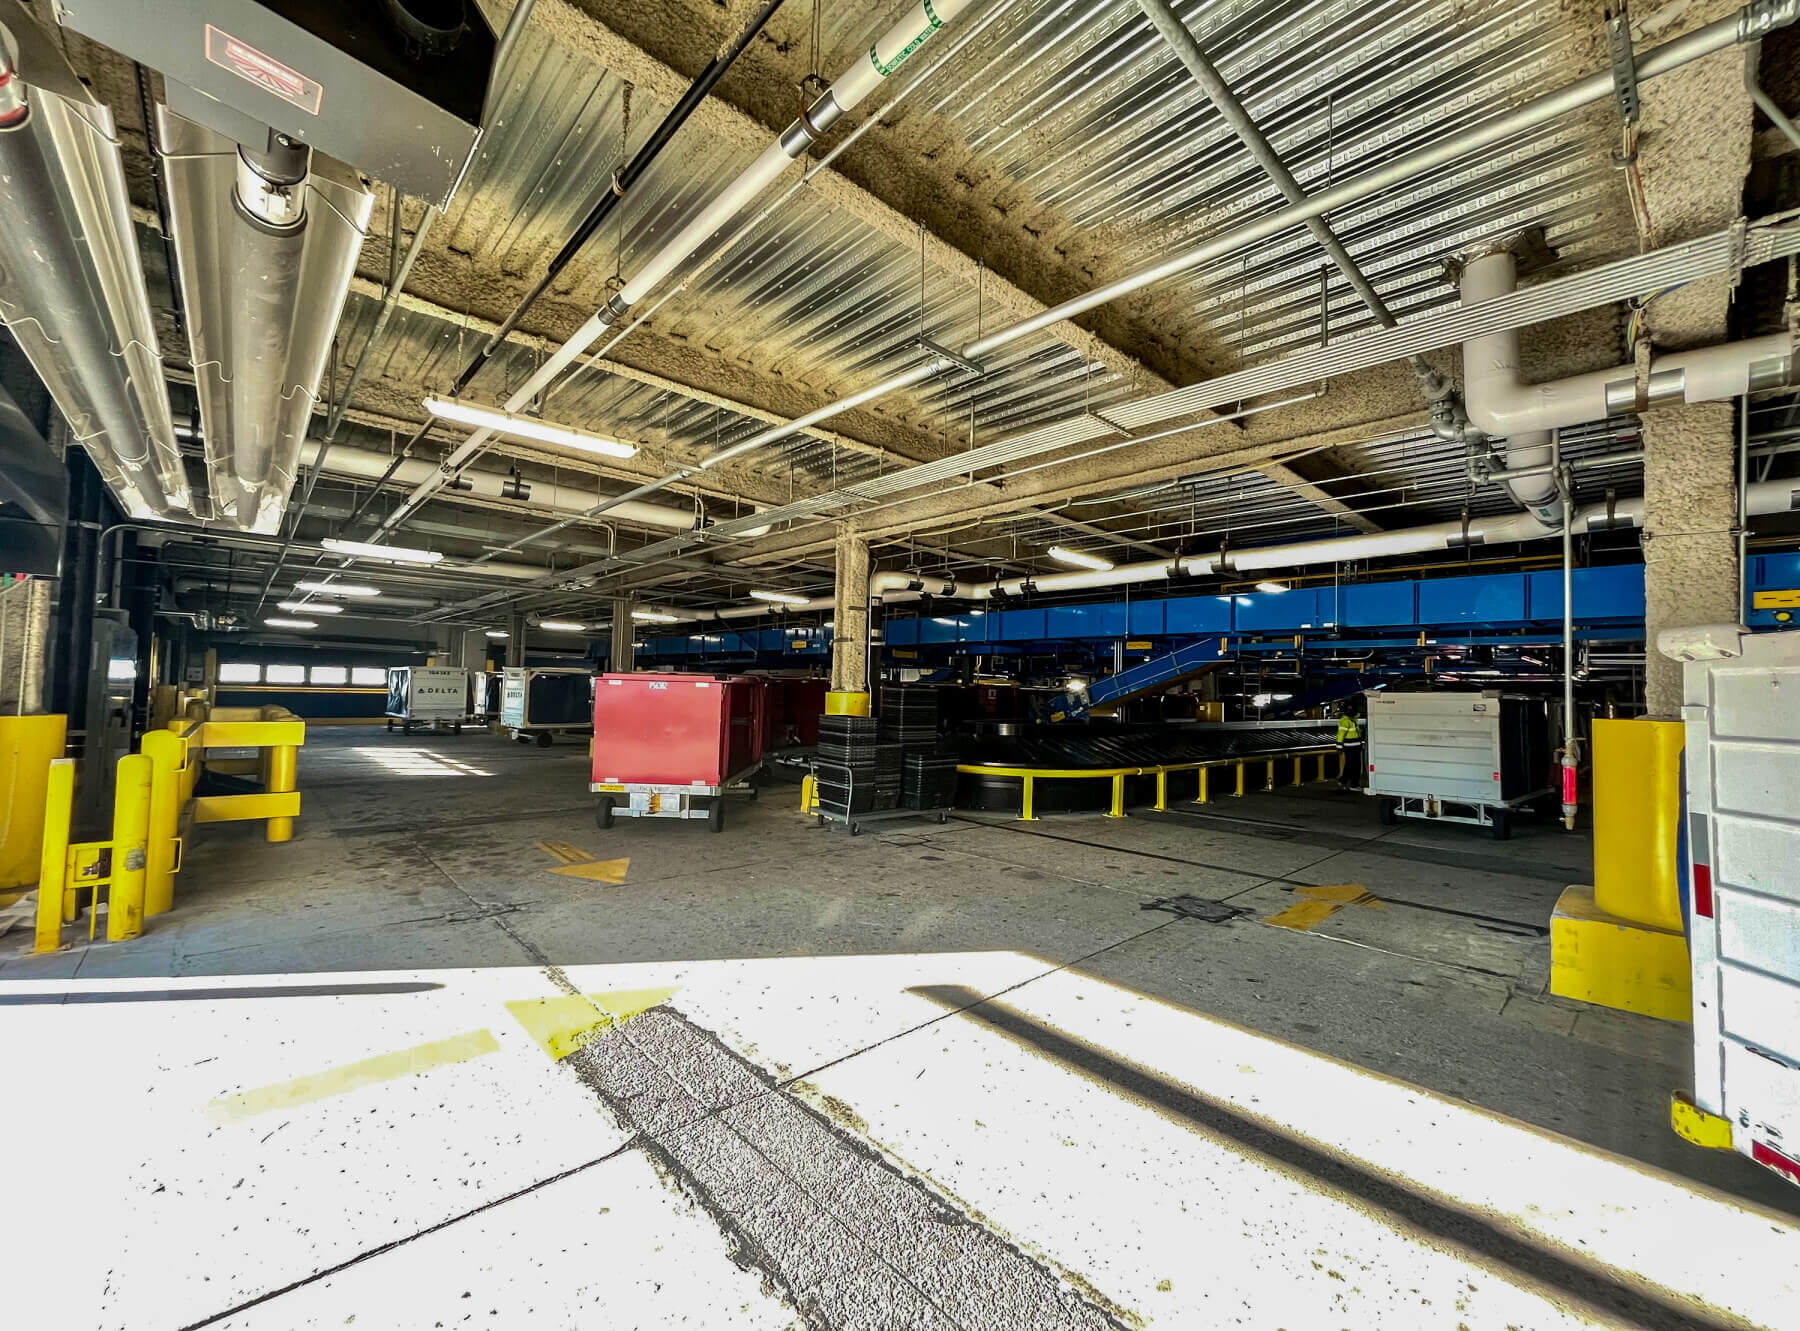 baggage handling conveyors inside the baggage handling expansion to Concourse A at Cincinnati/Northern Kentucky Airport